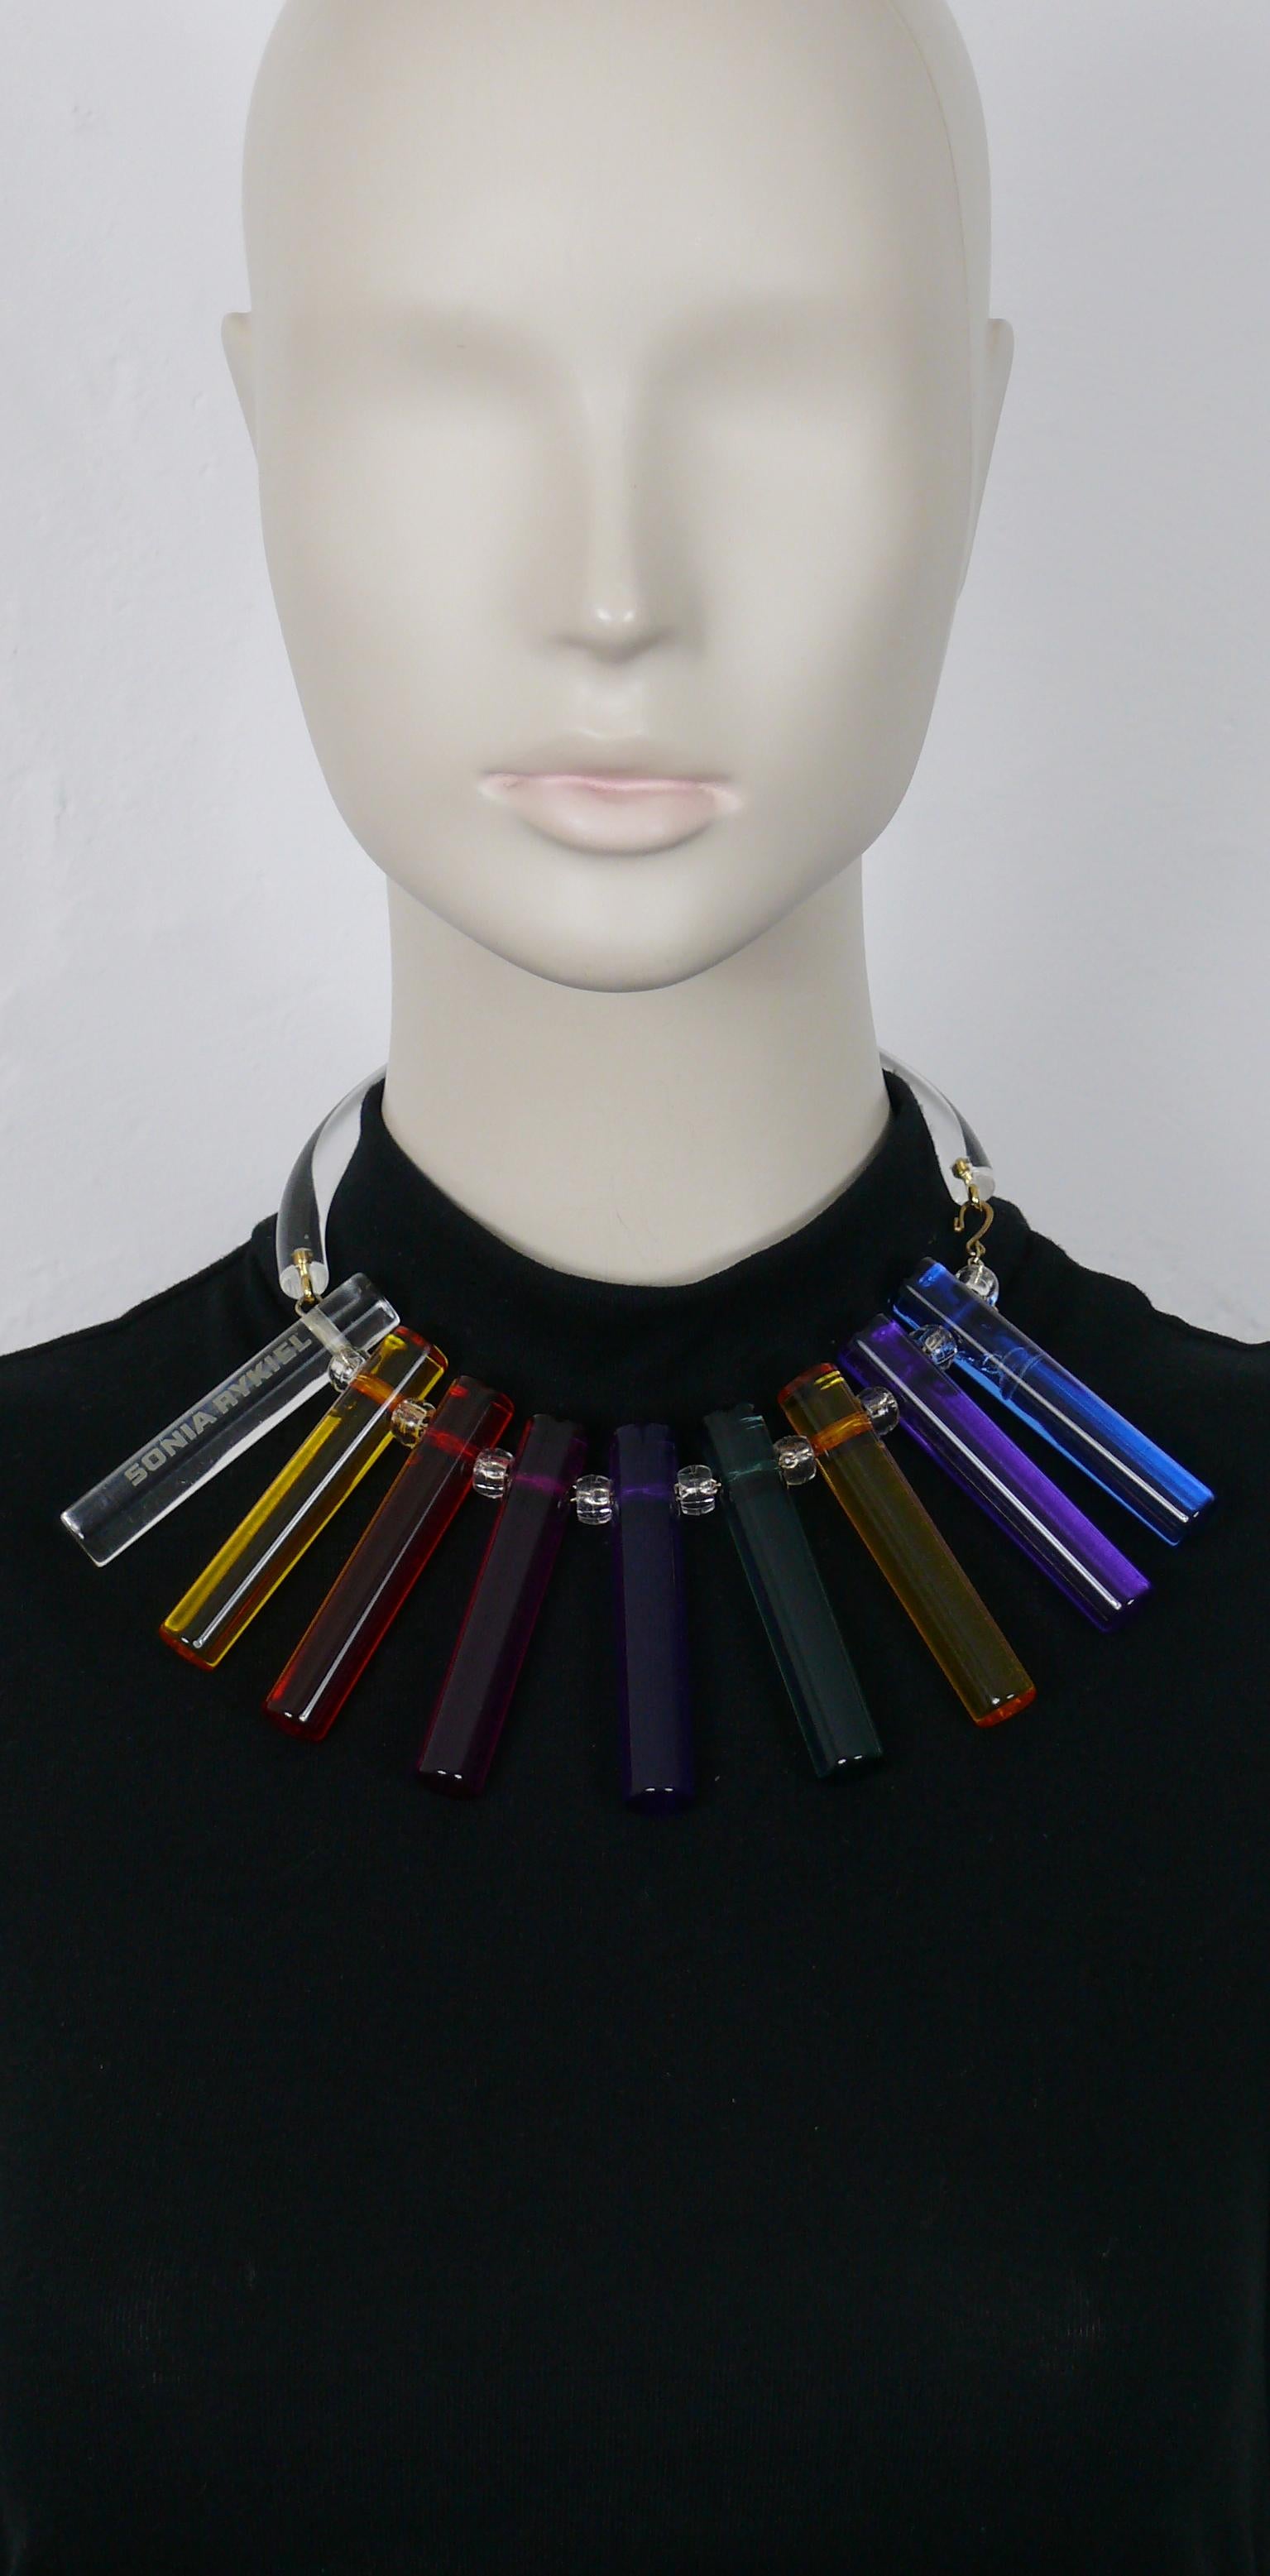 SONIA RYKIEL space age bib necklace featuring multi colored rainbow lucite tubes. 

Hook clasp closure.

Embossed SONIA RYKIEL.

Indicative measurements : inner circumference approx. 38.96 cm (15.34 inches) / length of the tubes approx. 7.2 cm (2.83